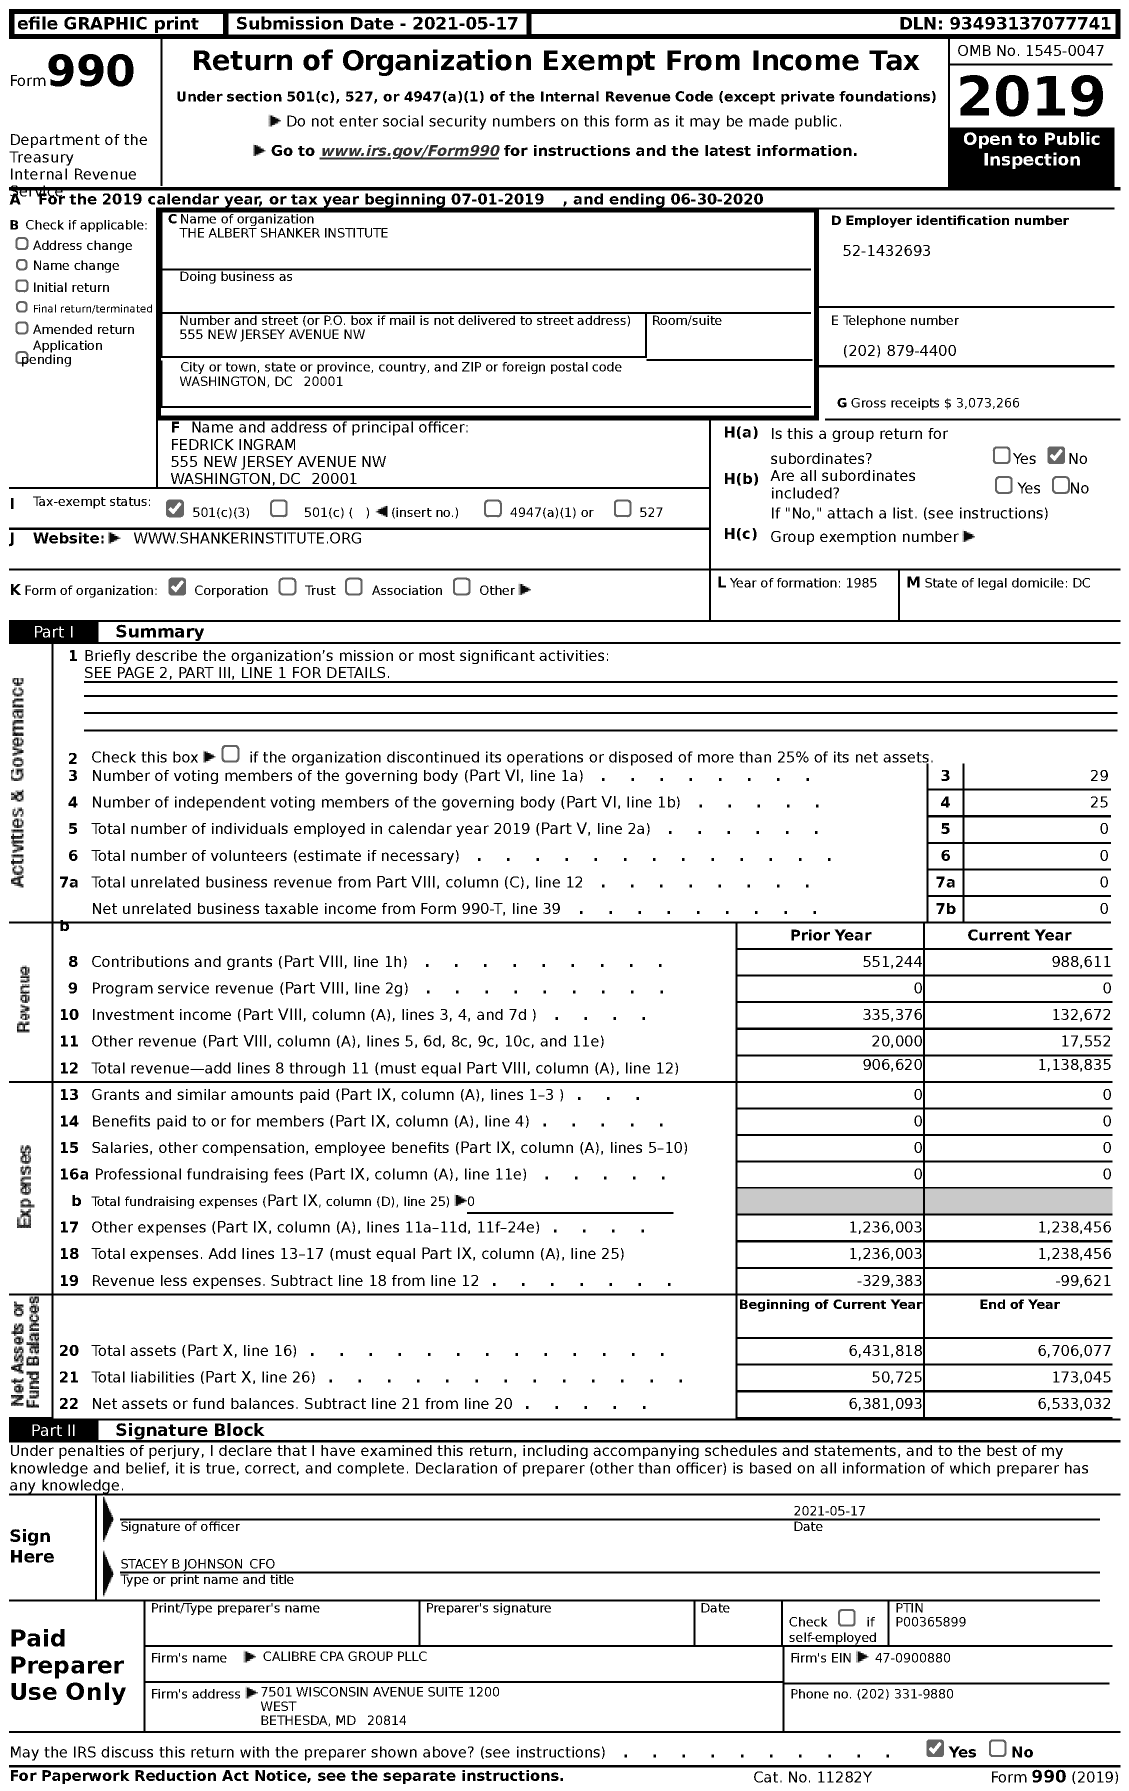 Image of first page of 2019 Form 990 for Albert Shanker Institute (ASI)